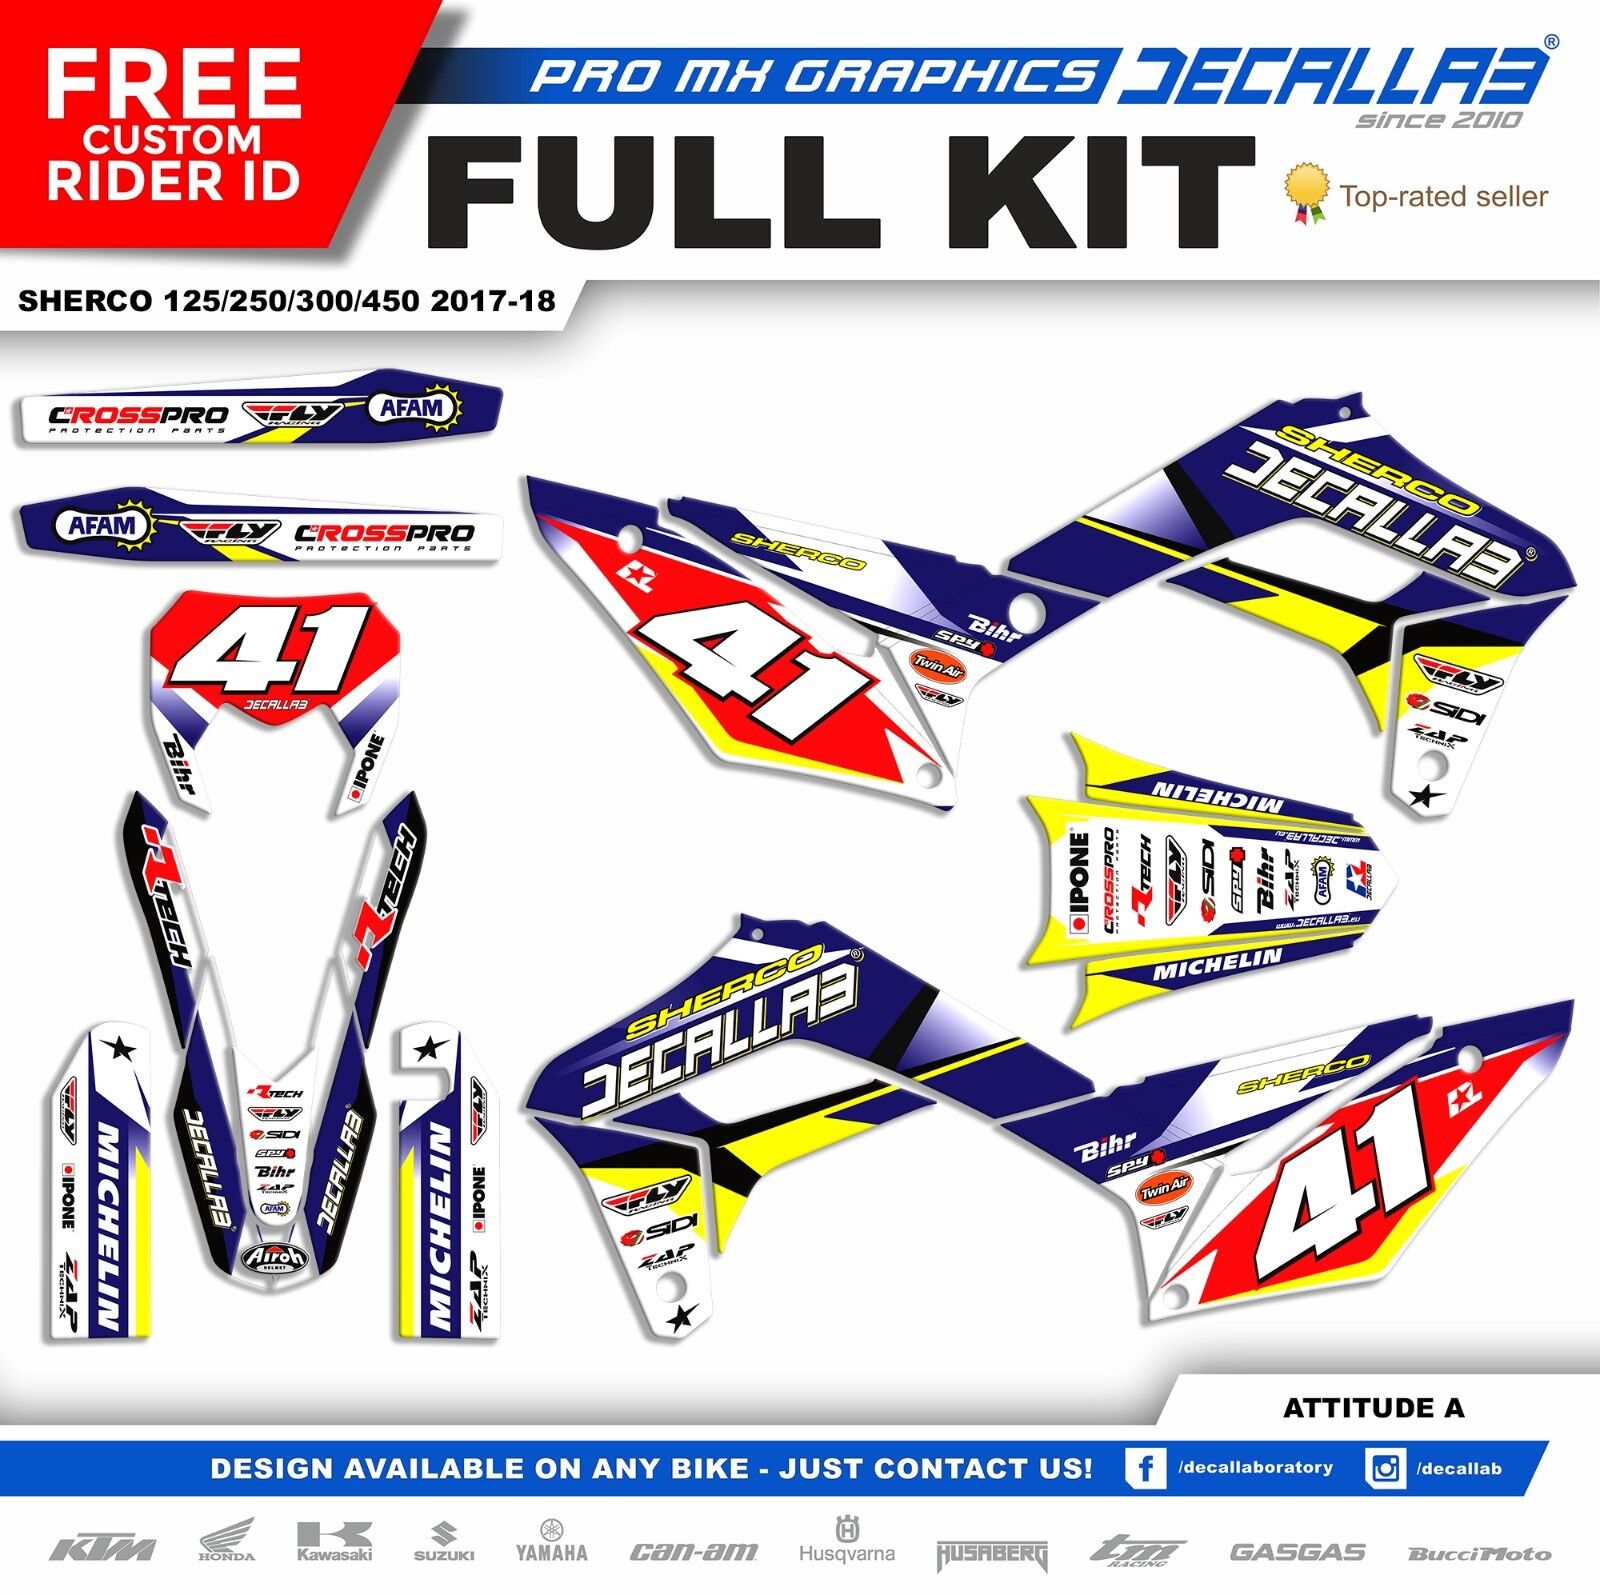 Sherco  2017 2018 Super durable MX Graphics Decals Stickers Decallab